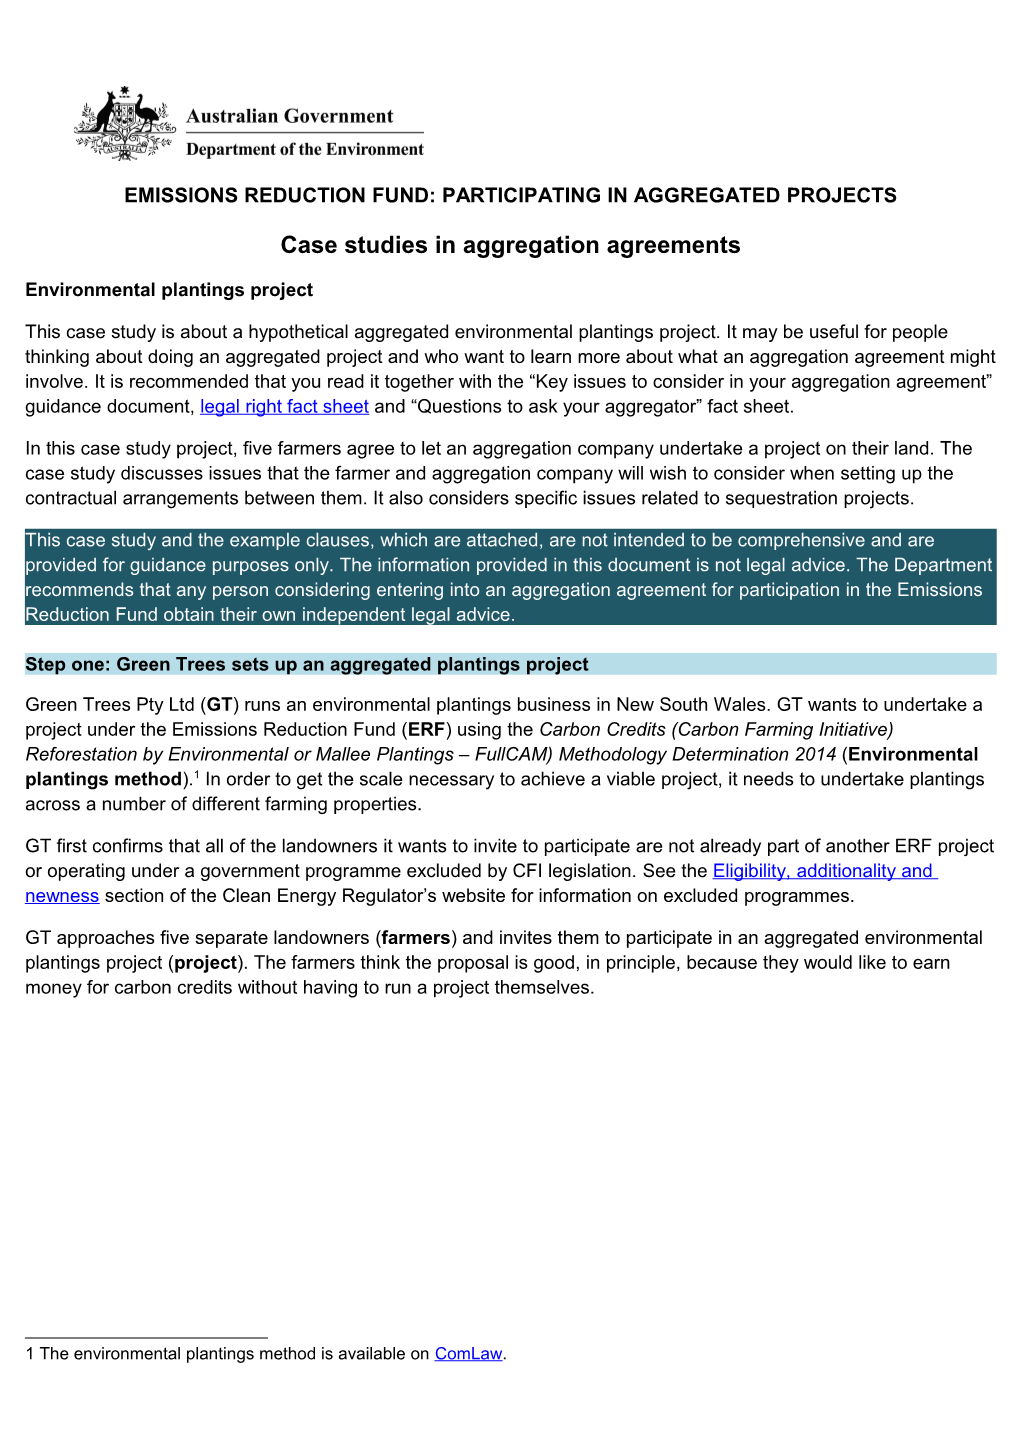 ERF: Participating in Aggregated Projects - Case Studies in Aggregation Agreements